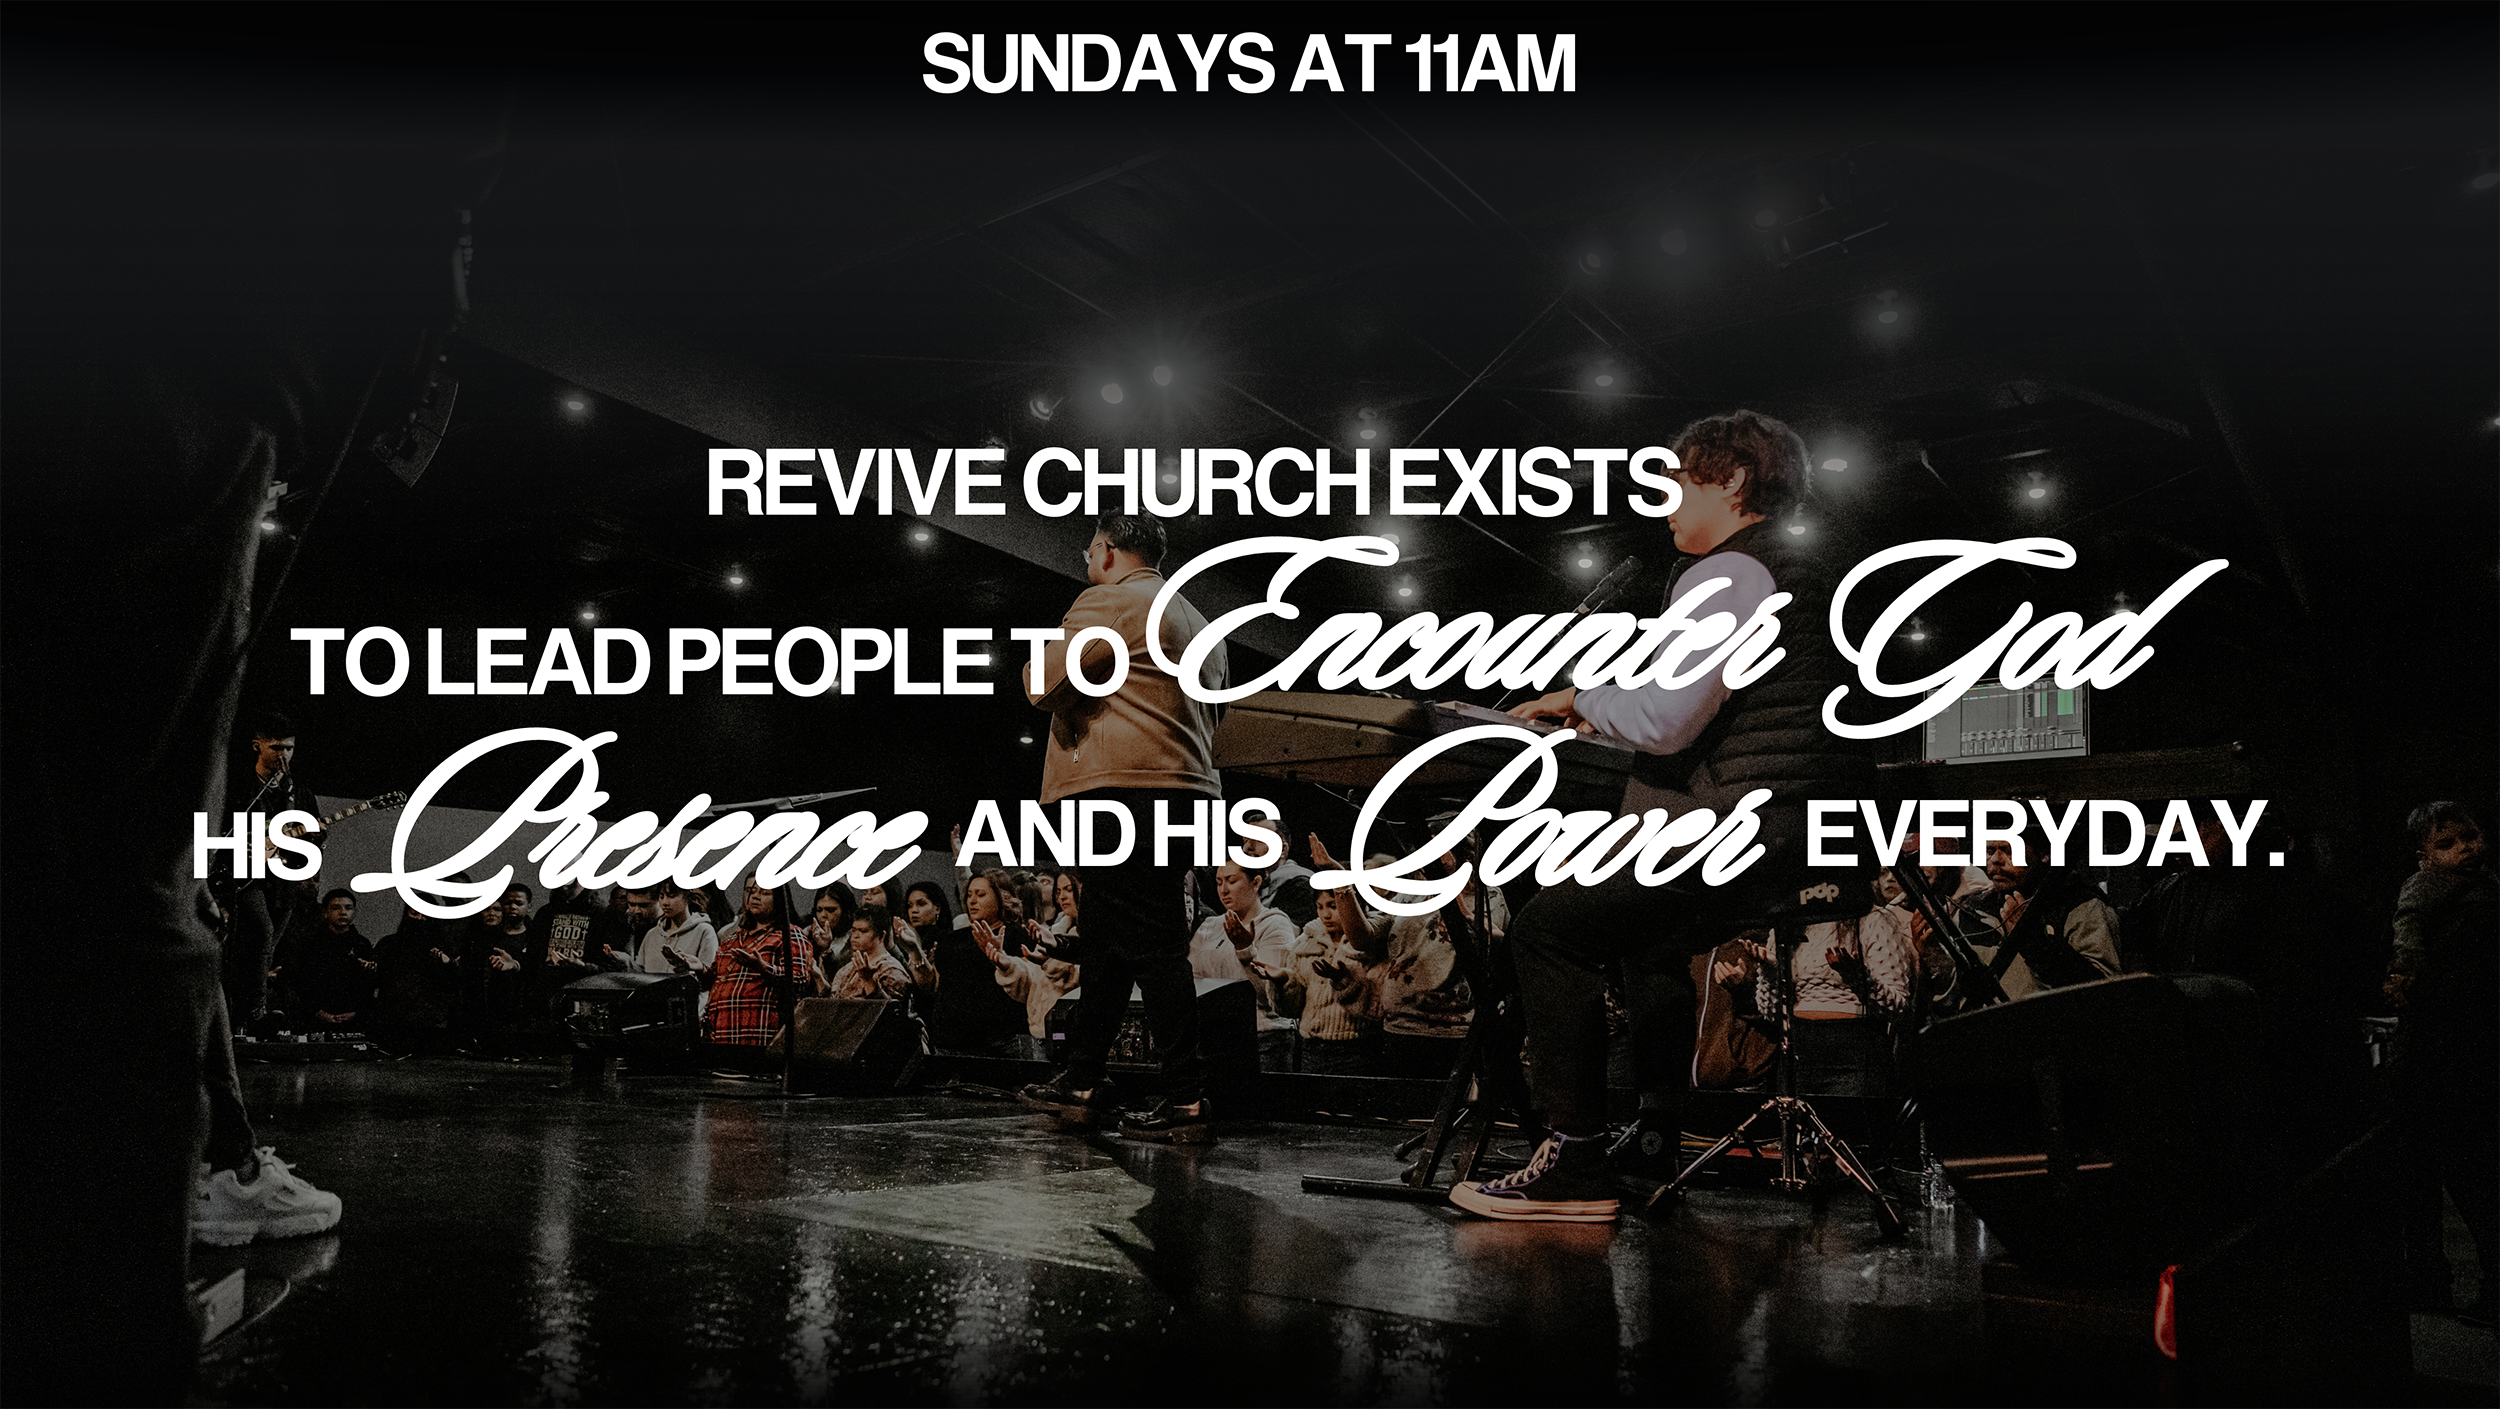 Revive Church Exists to Lead People to Encounter God, His Presence and His Power Everyday.